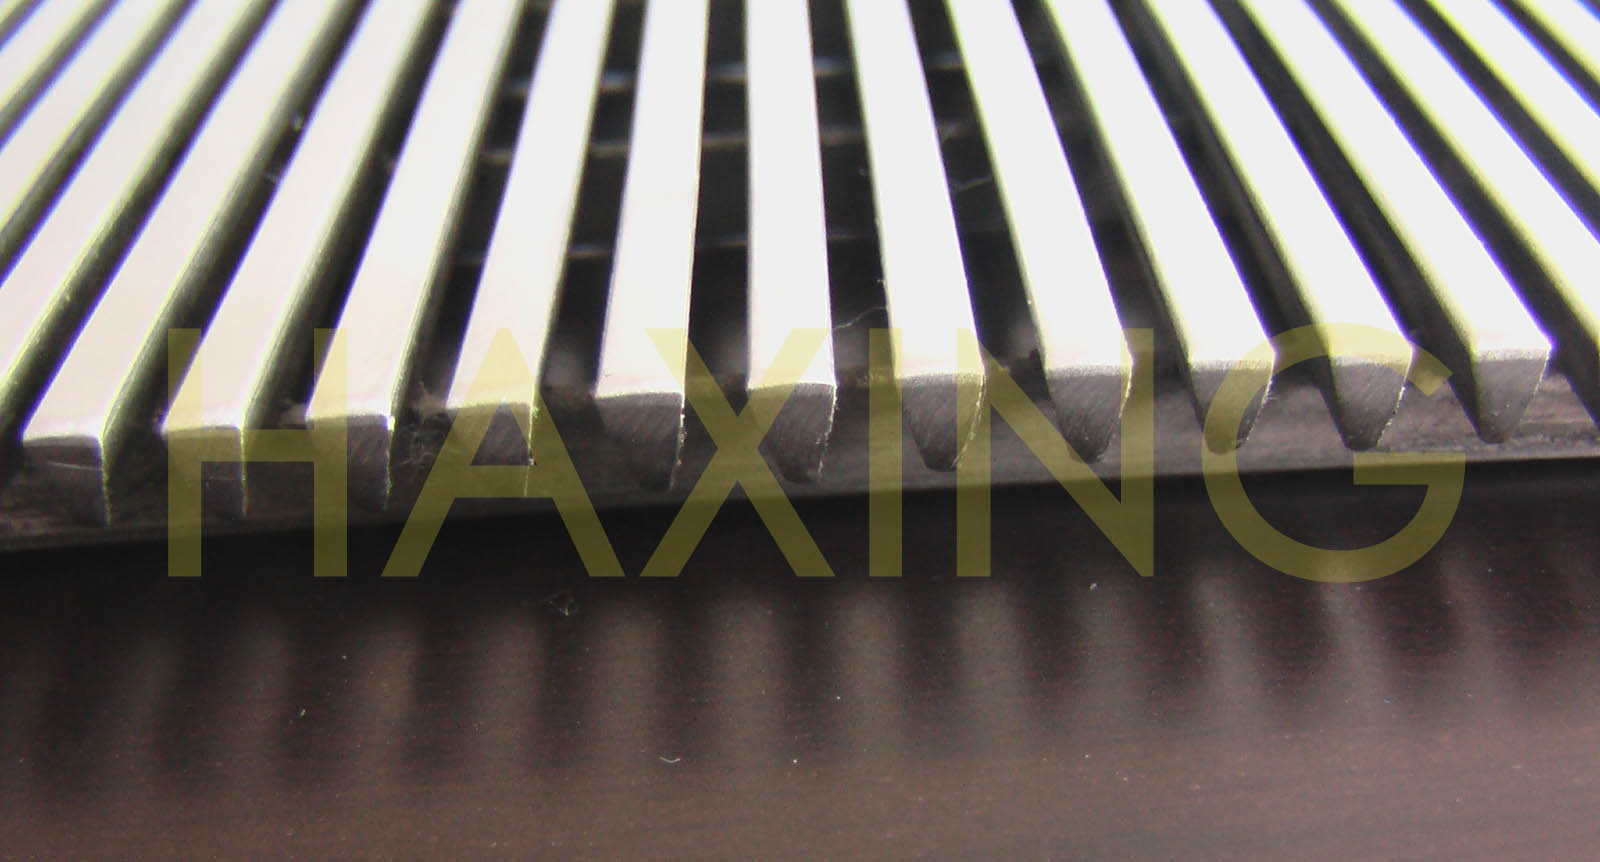 sieve bend screen or drain grille Made in Korea